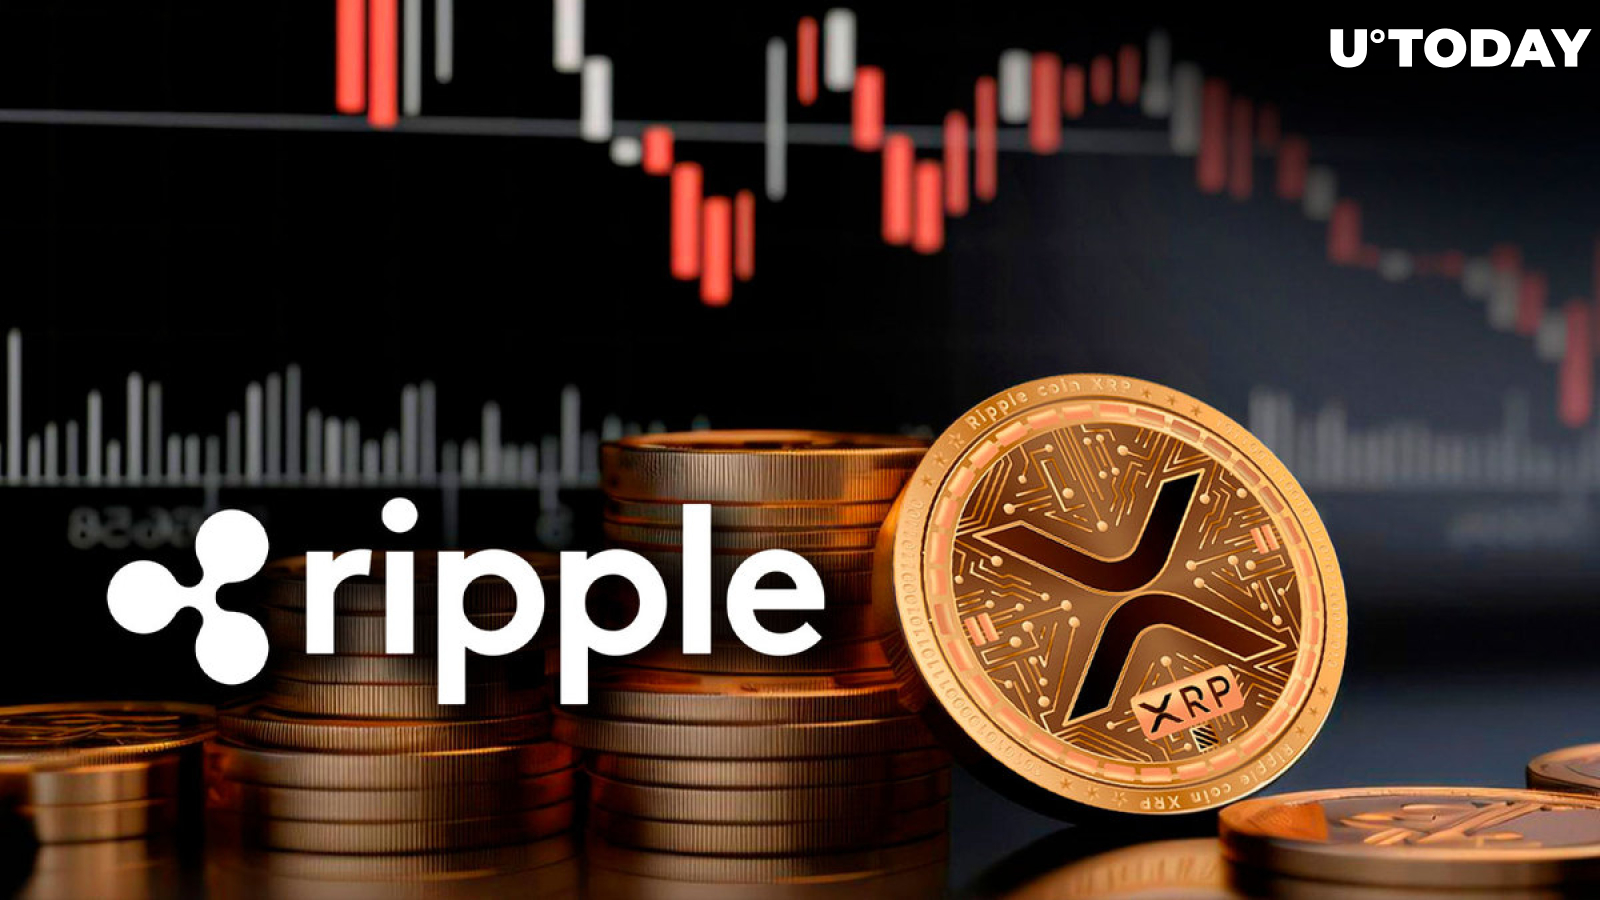 Ripple Sells Tens of Millions of XRP at a Loss – Price Drops After Recent Rise